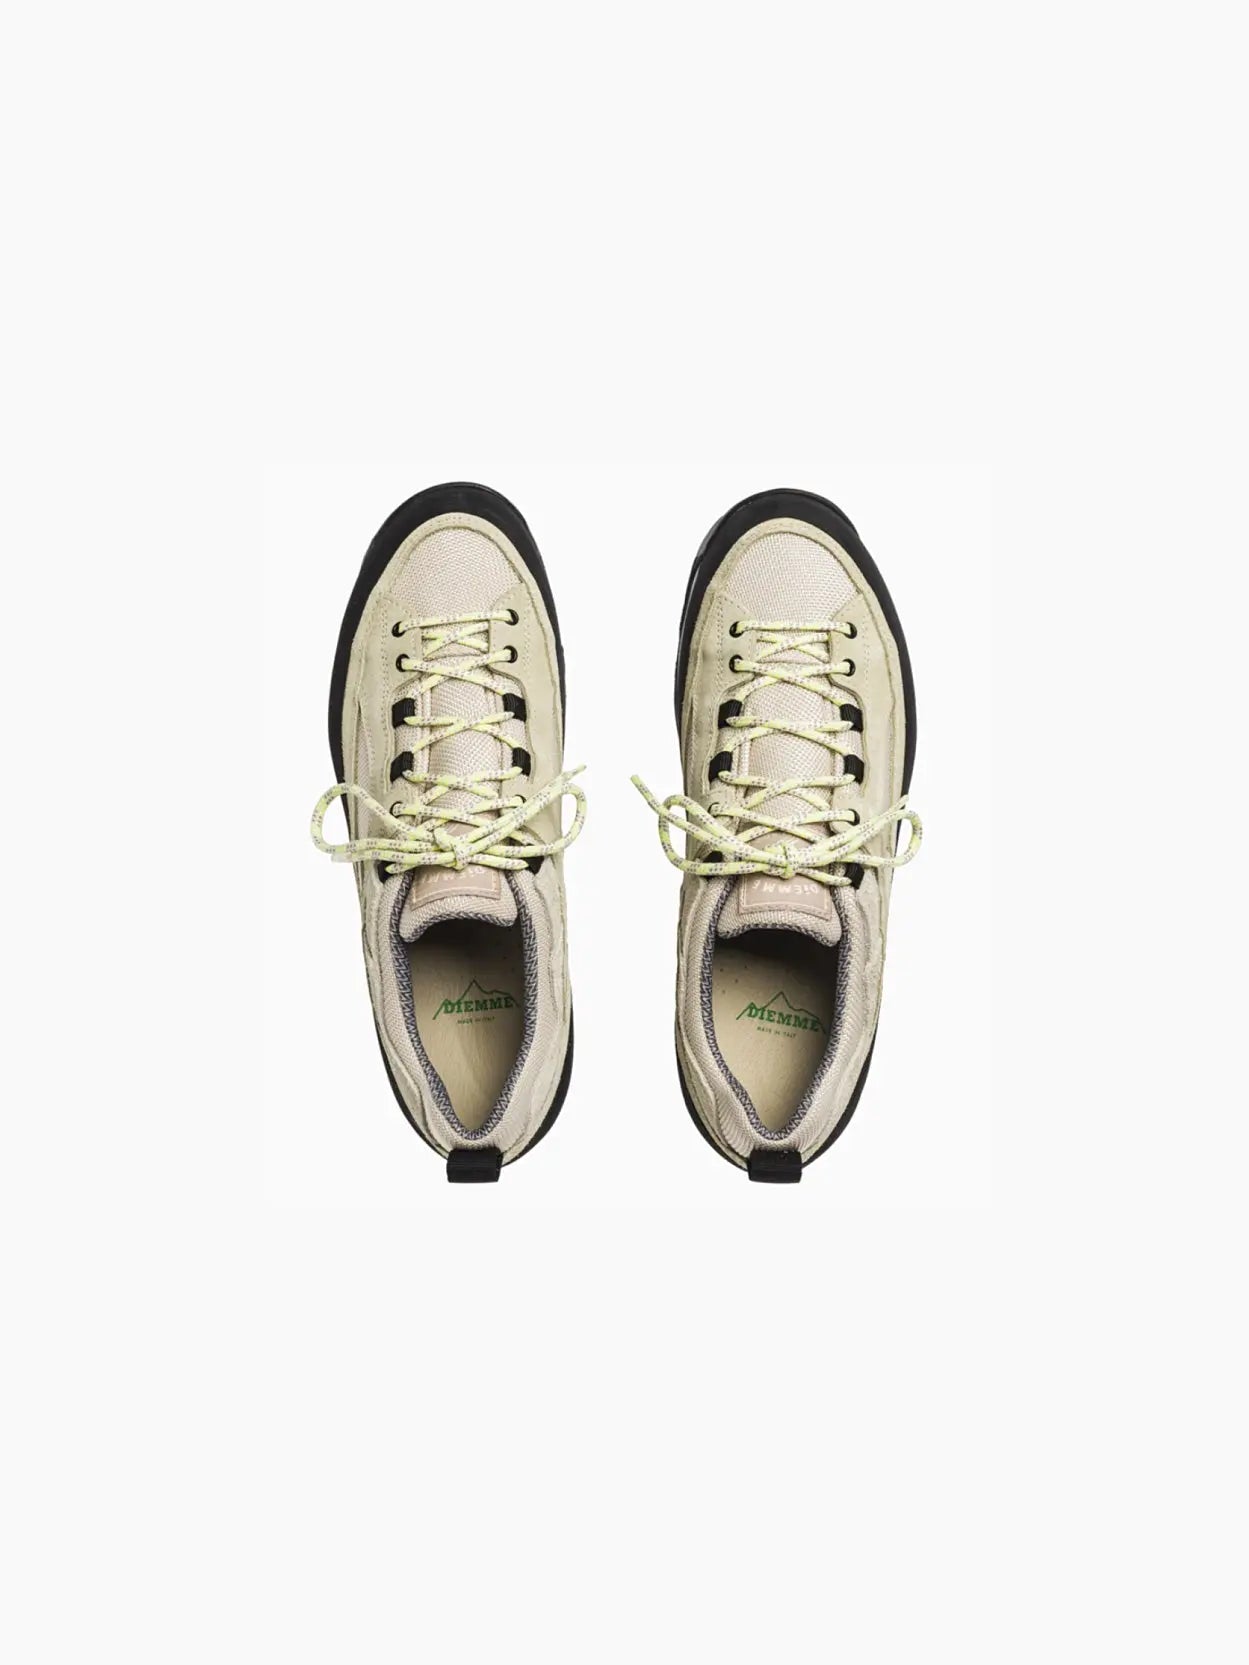 Image of a single Diemme Grappa Hicker Ecru with a beige and black color scheme. The shoe features a low-top design with green laces, a black rubber sole, and a black heel tab for easy wearing. Displayed in side profile on a plain white background, this stylish piece is available at Bassalstore in Barcelona.